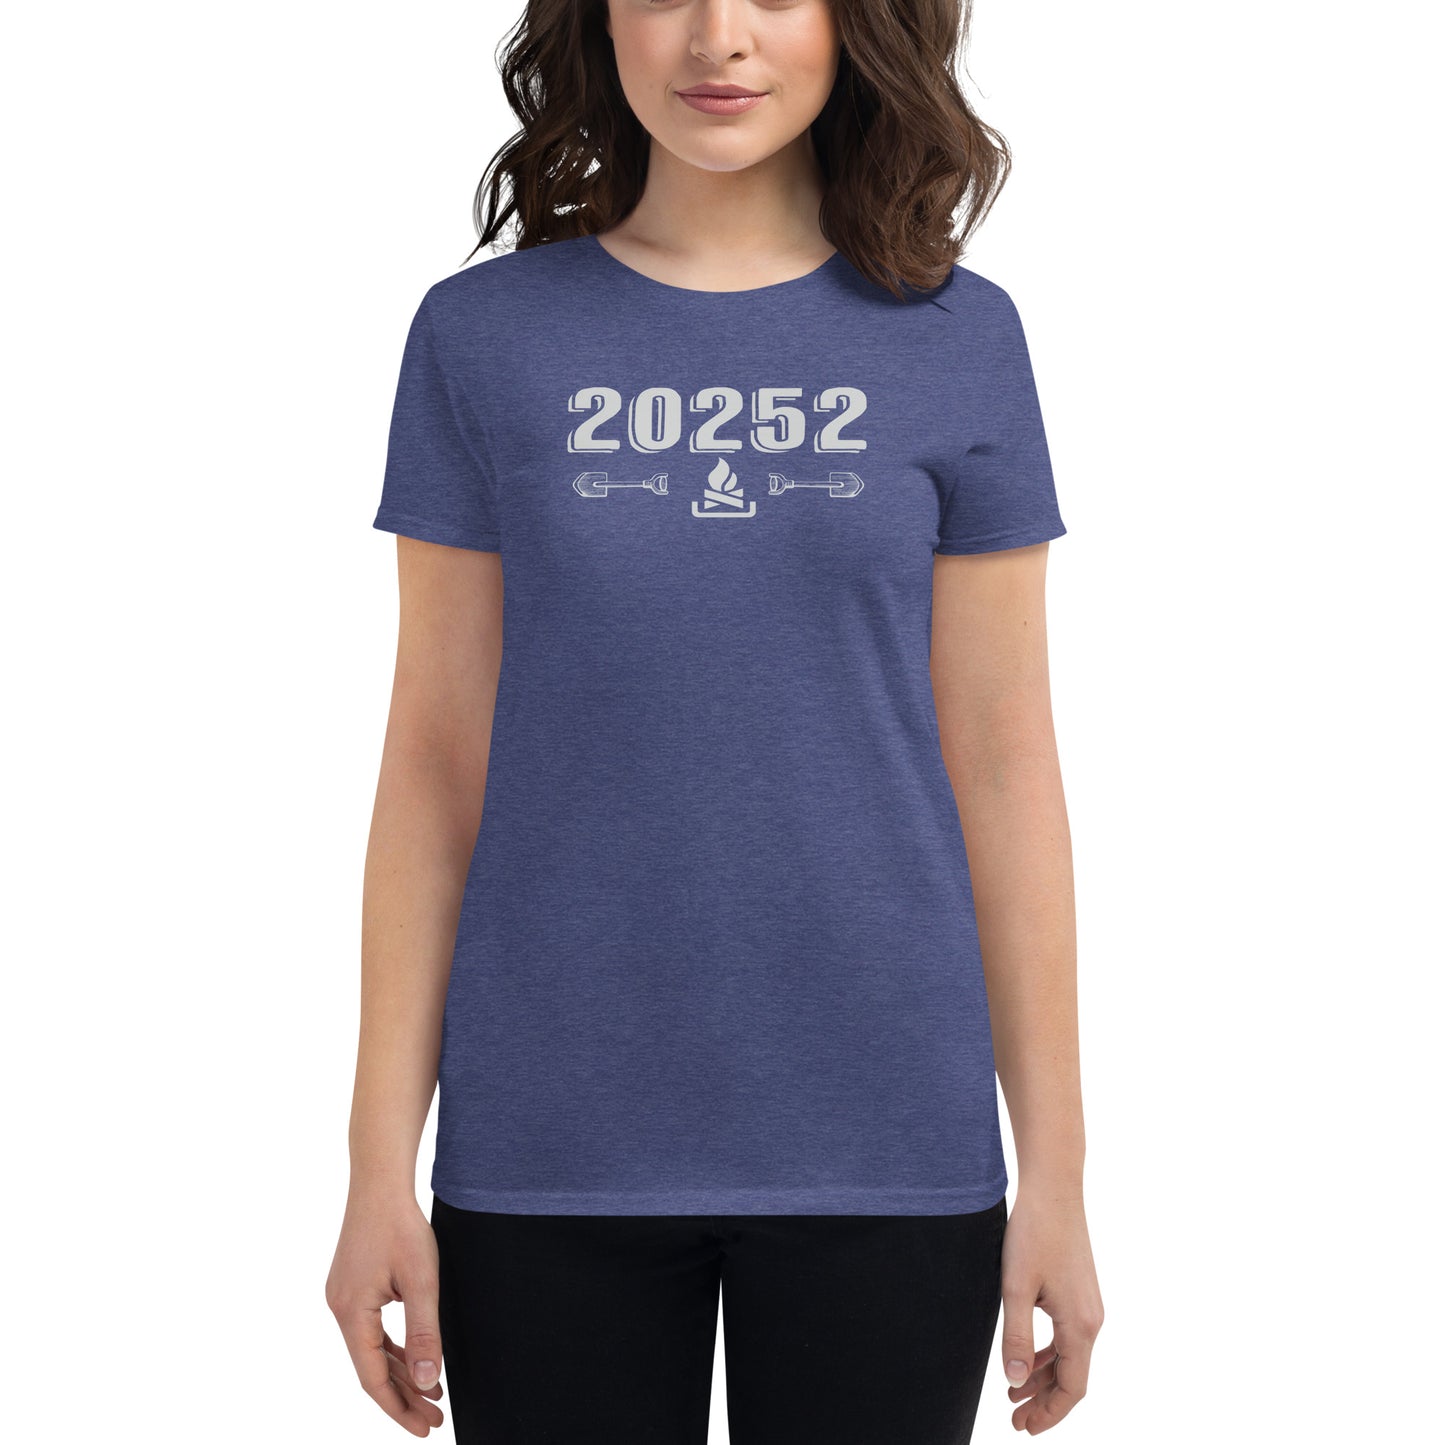 Women's Fashion Fit Tee - 20252 with Campfire Icon